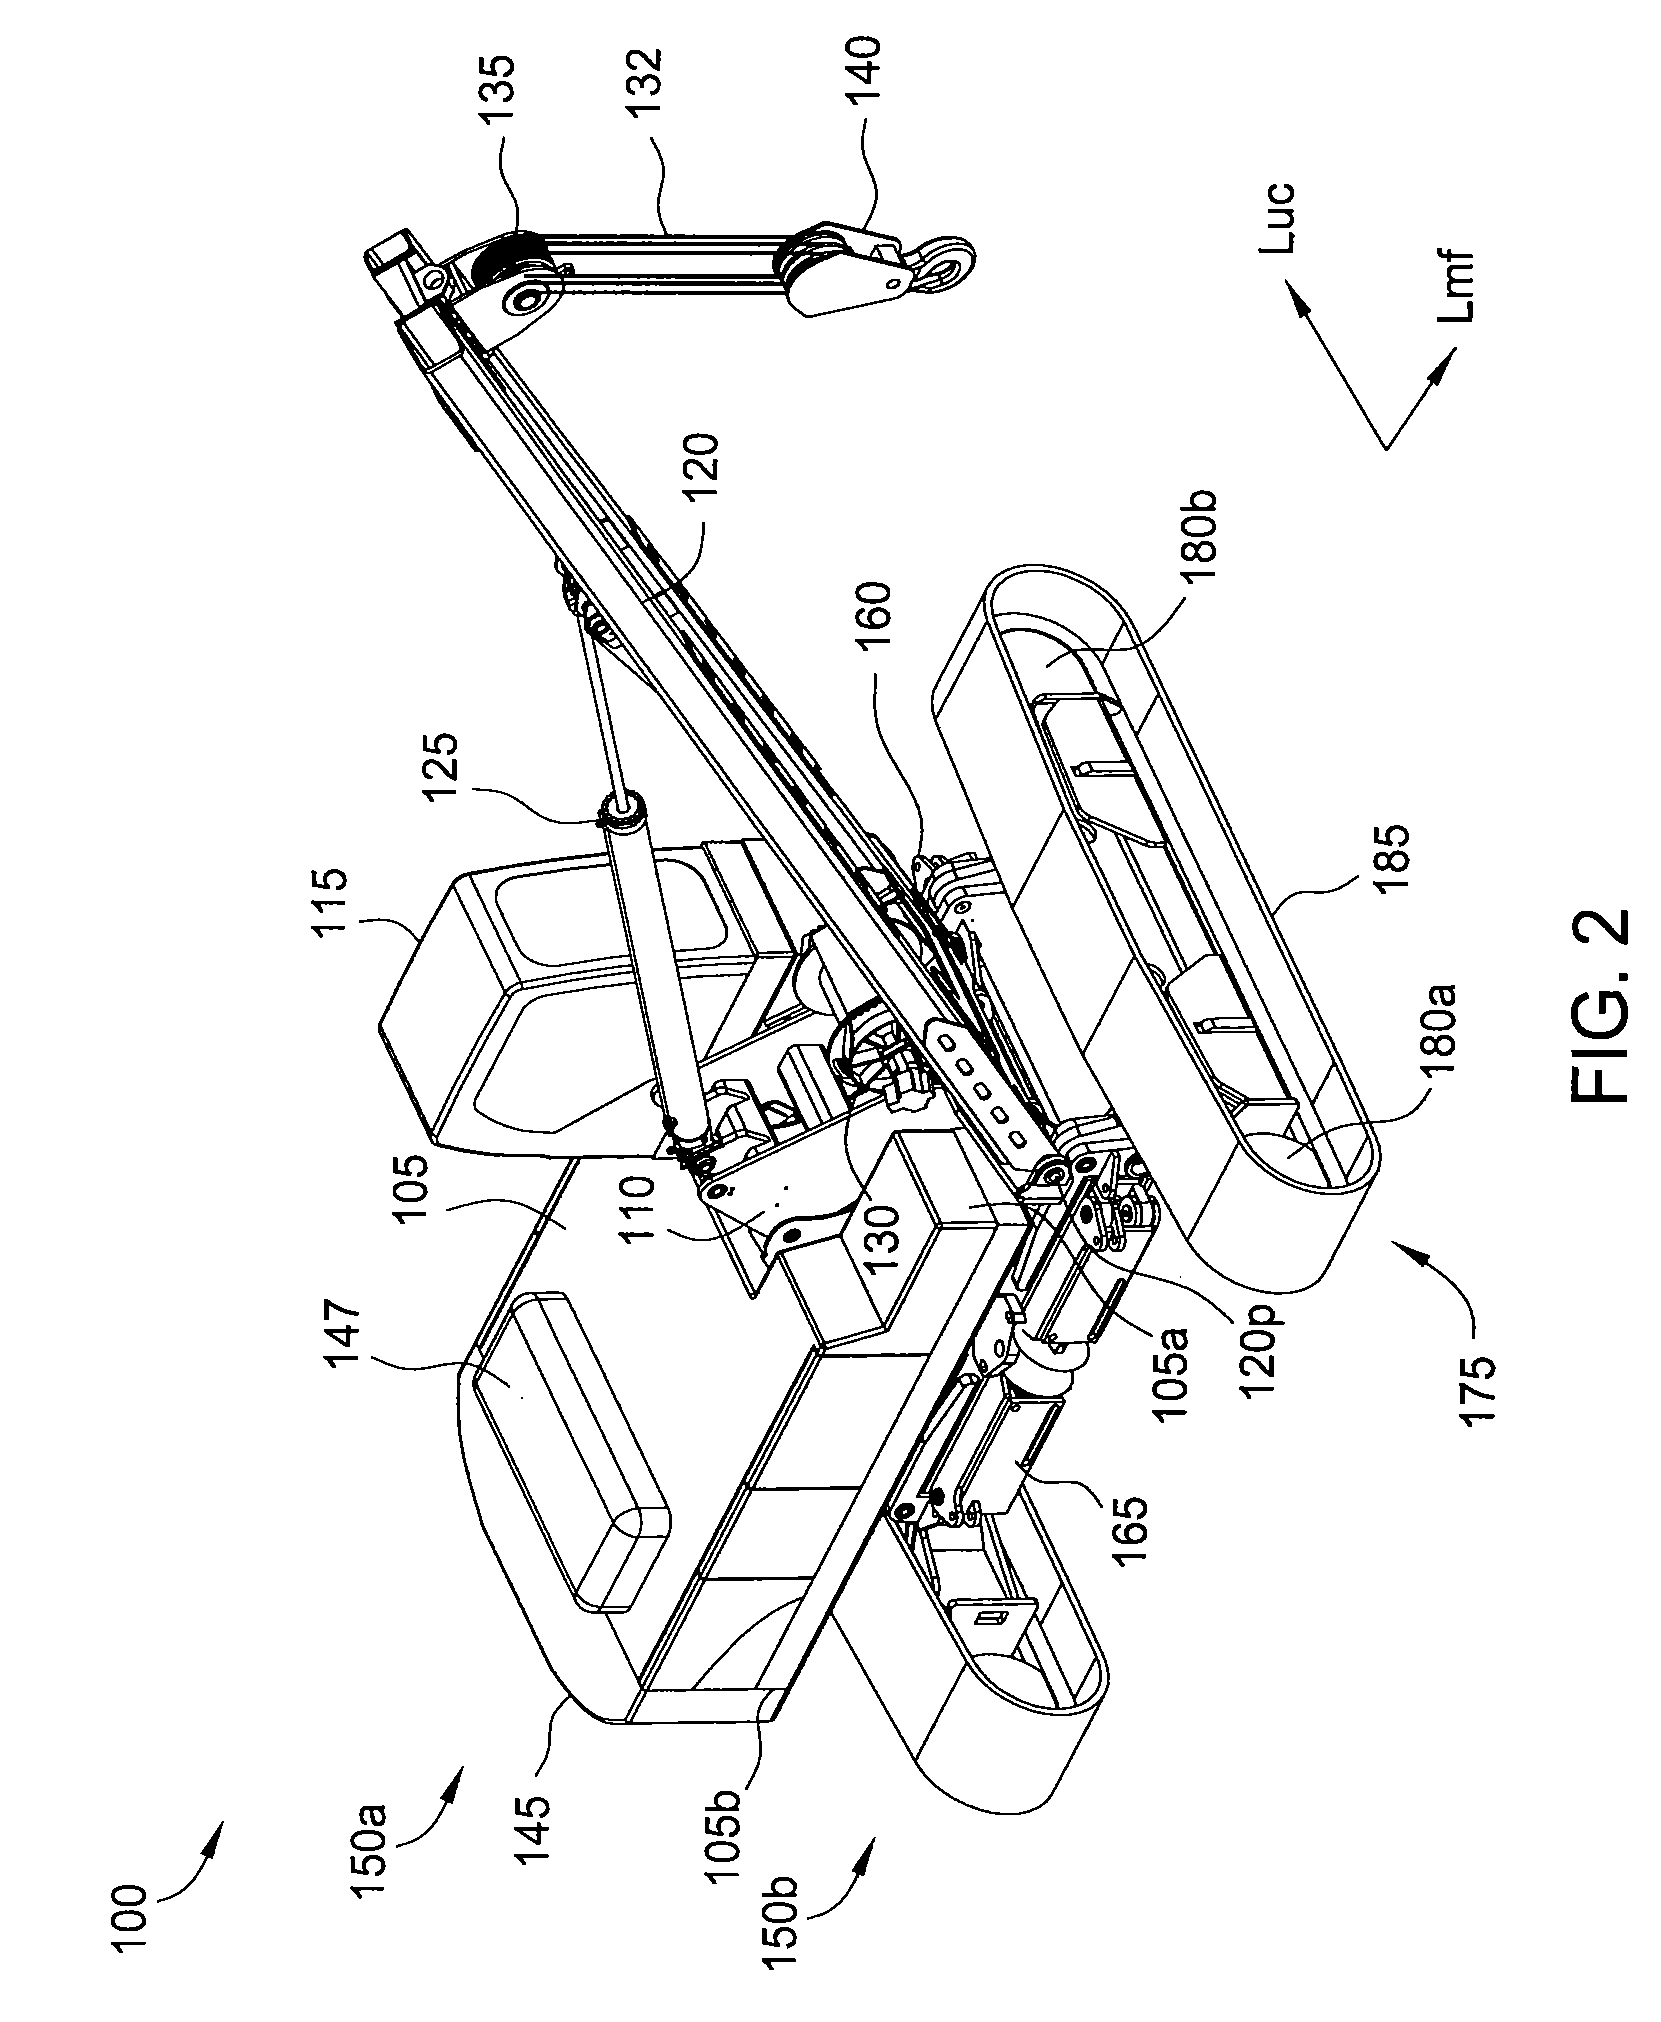 Pipelayer and method of loading pipelayer or excavator for transportation